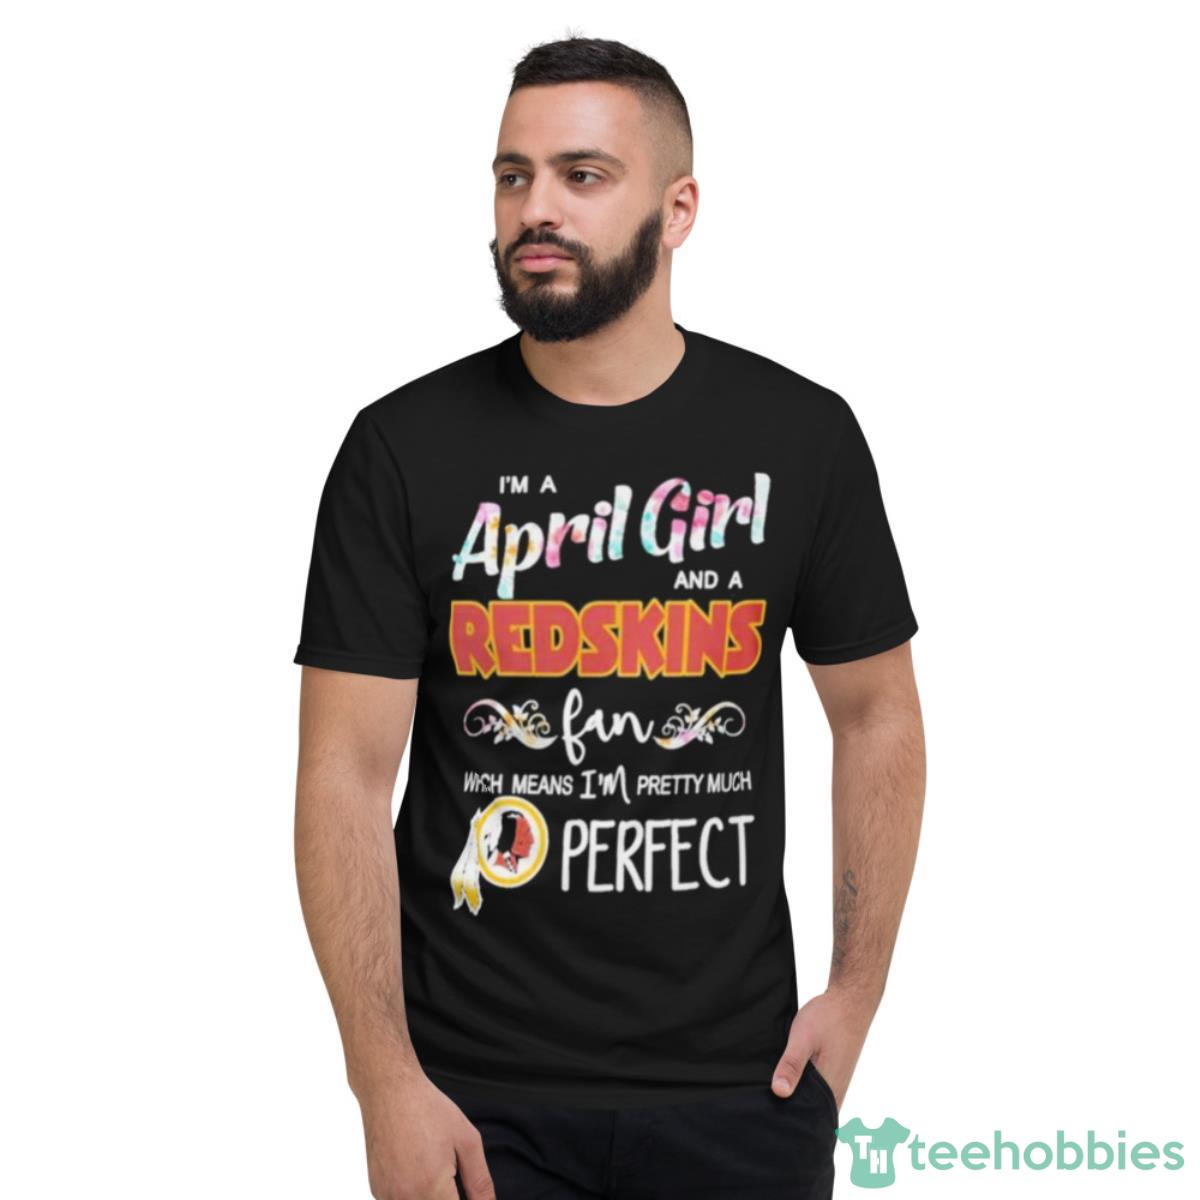 Im A April Girl And A Washington Redskins Fan Which Means Im Pretty Much Perfect Shirt - Short Sleeve T-Shirt